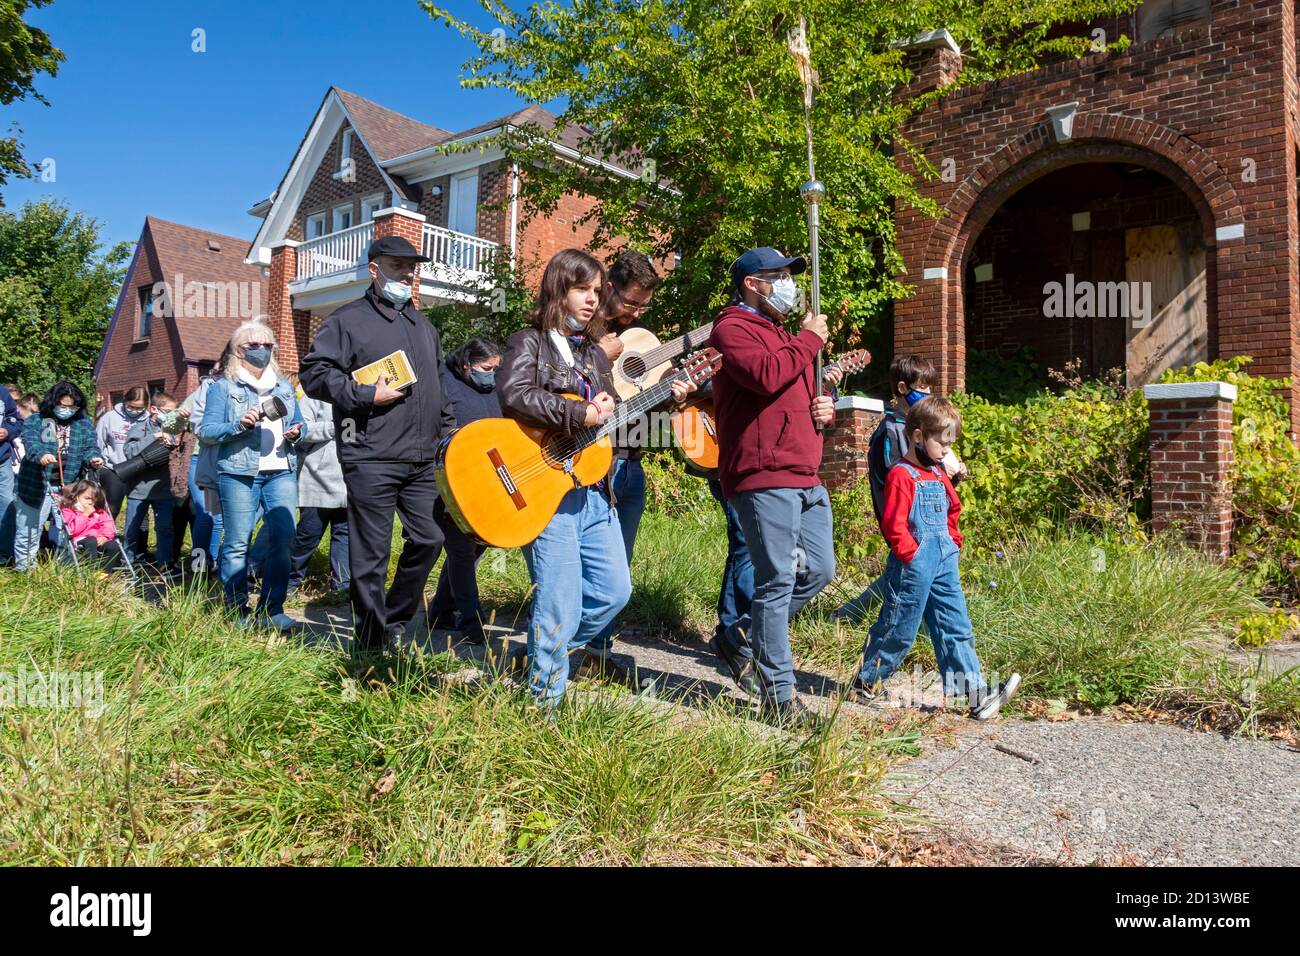 Detroit, Michigan - Missionaries with the Neocatechumenal Way lead a procession past a boarded-up house on the east side of Detroit, followed by an ou Stock Photo